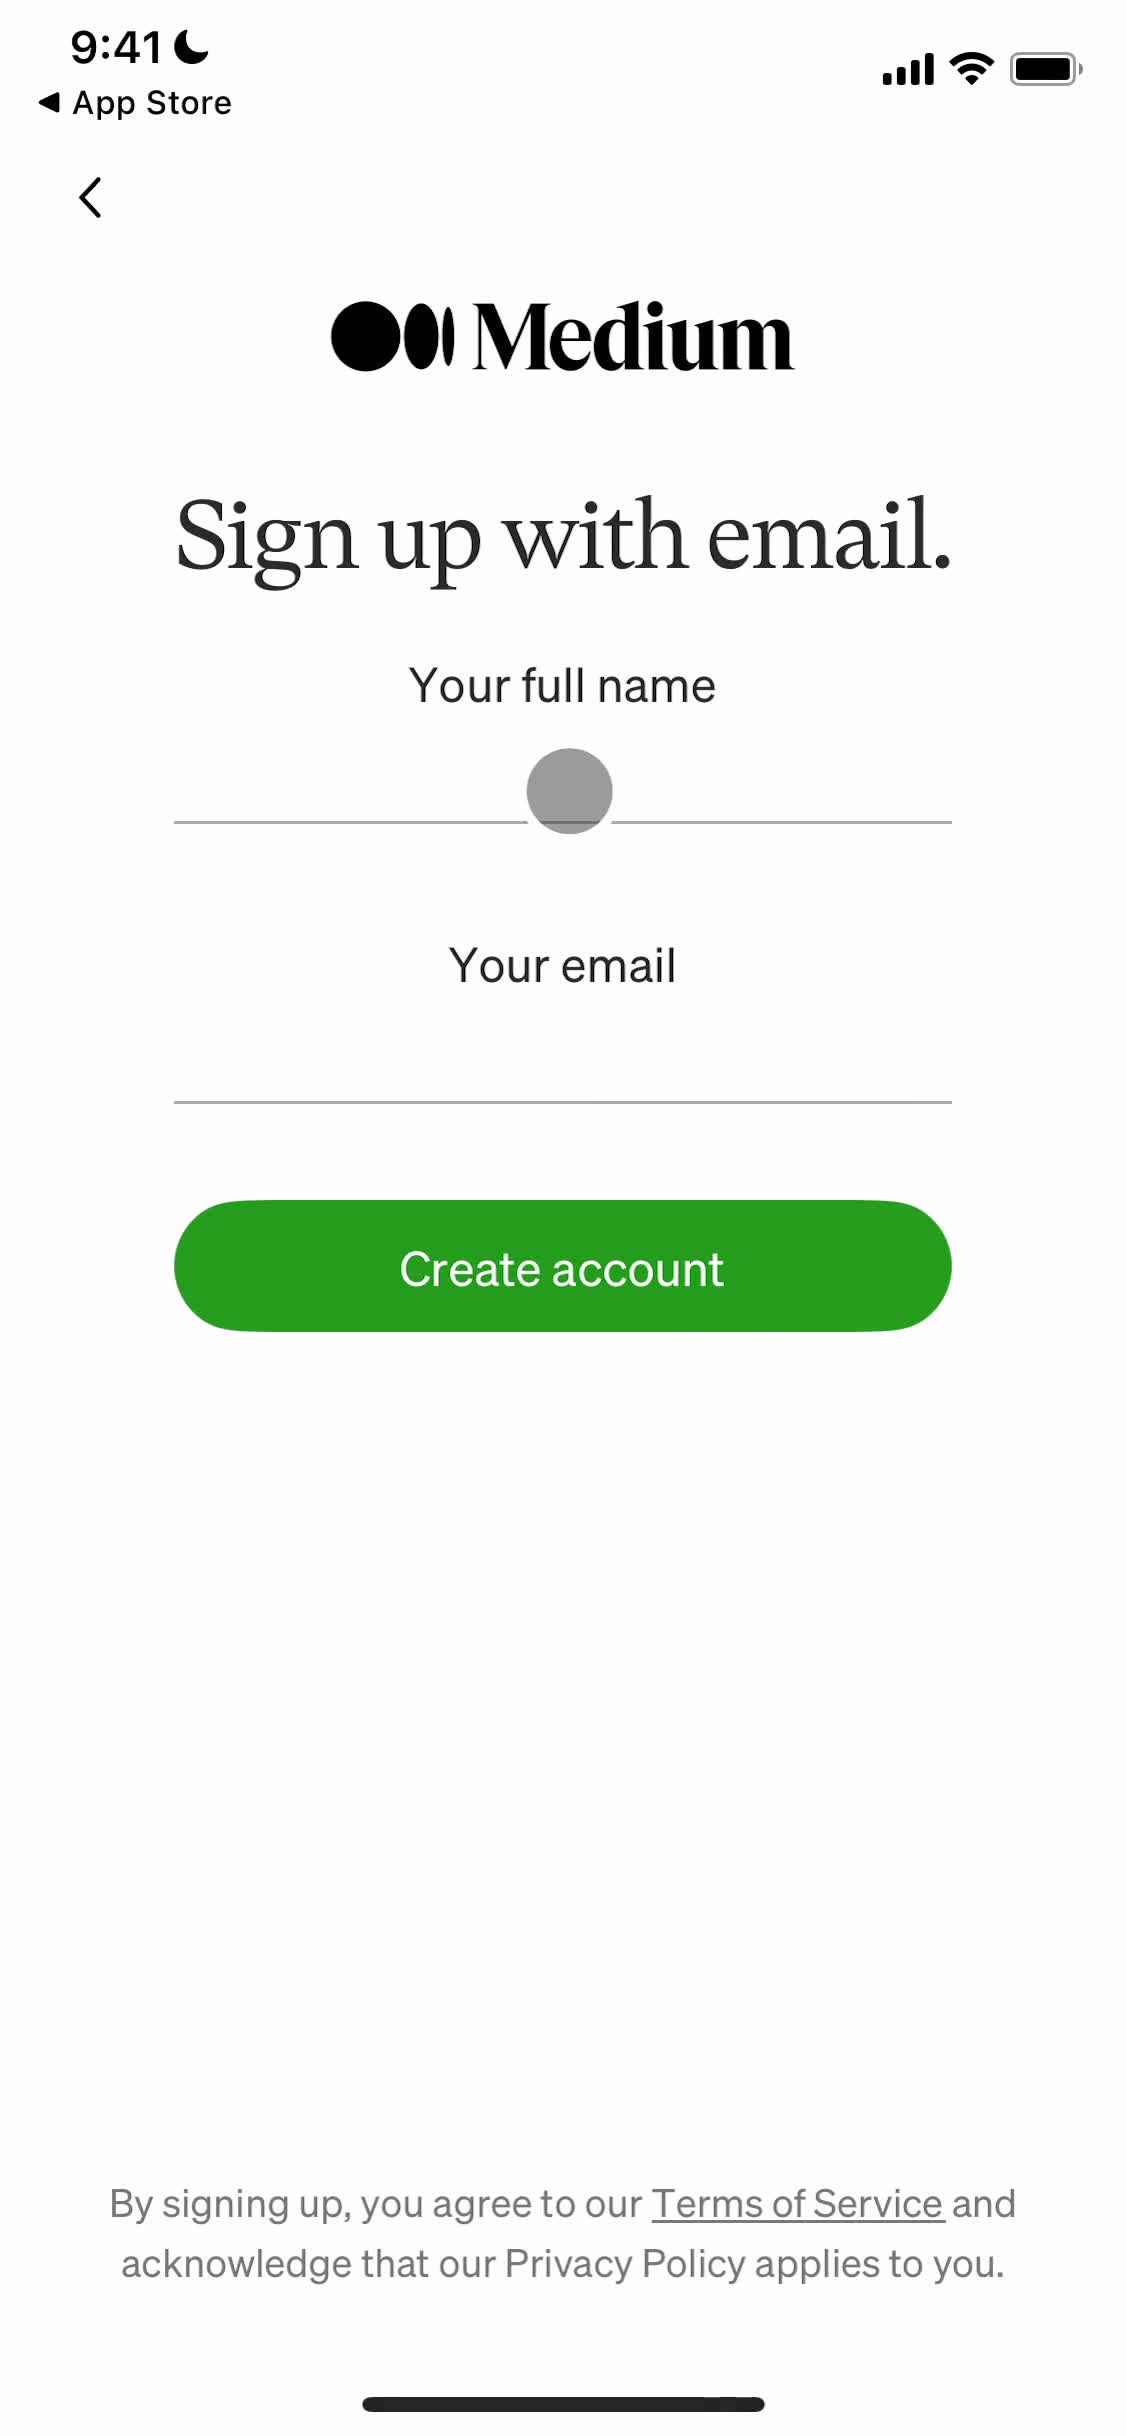 Medium sign up with email screenshot